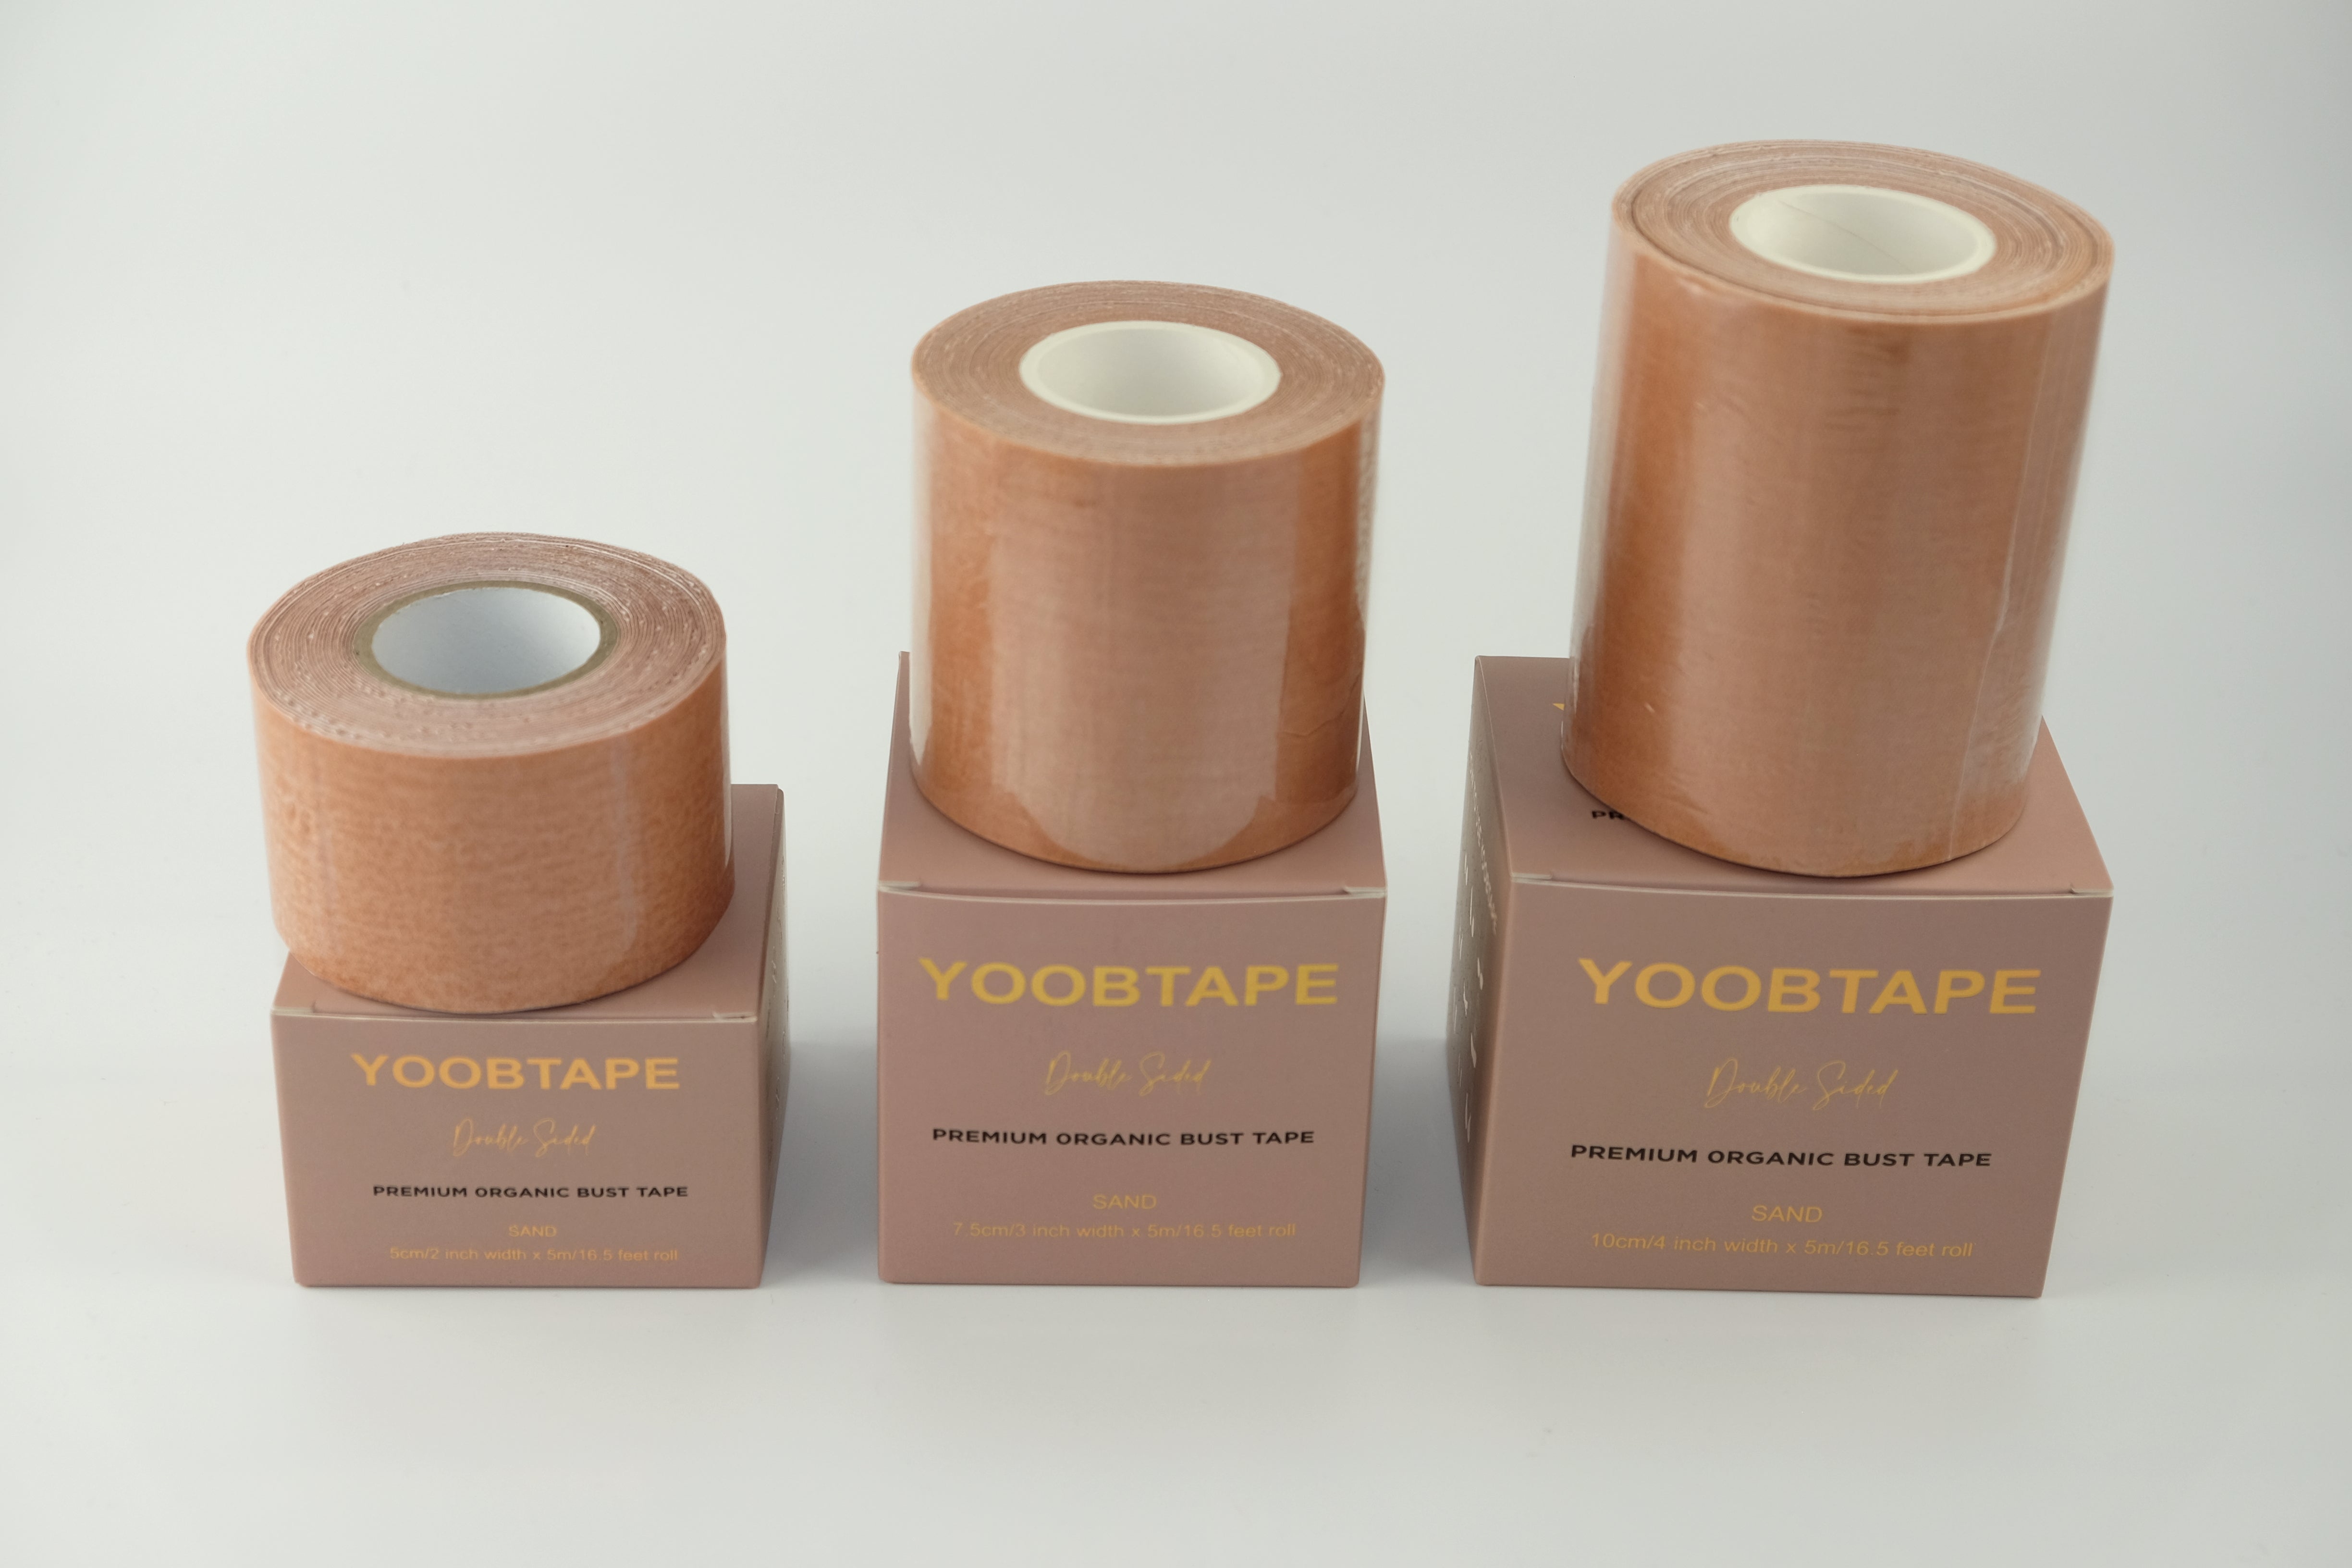 YOOBTAPE Premium Double Sided Bust Tape - Sand